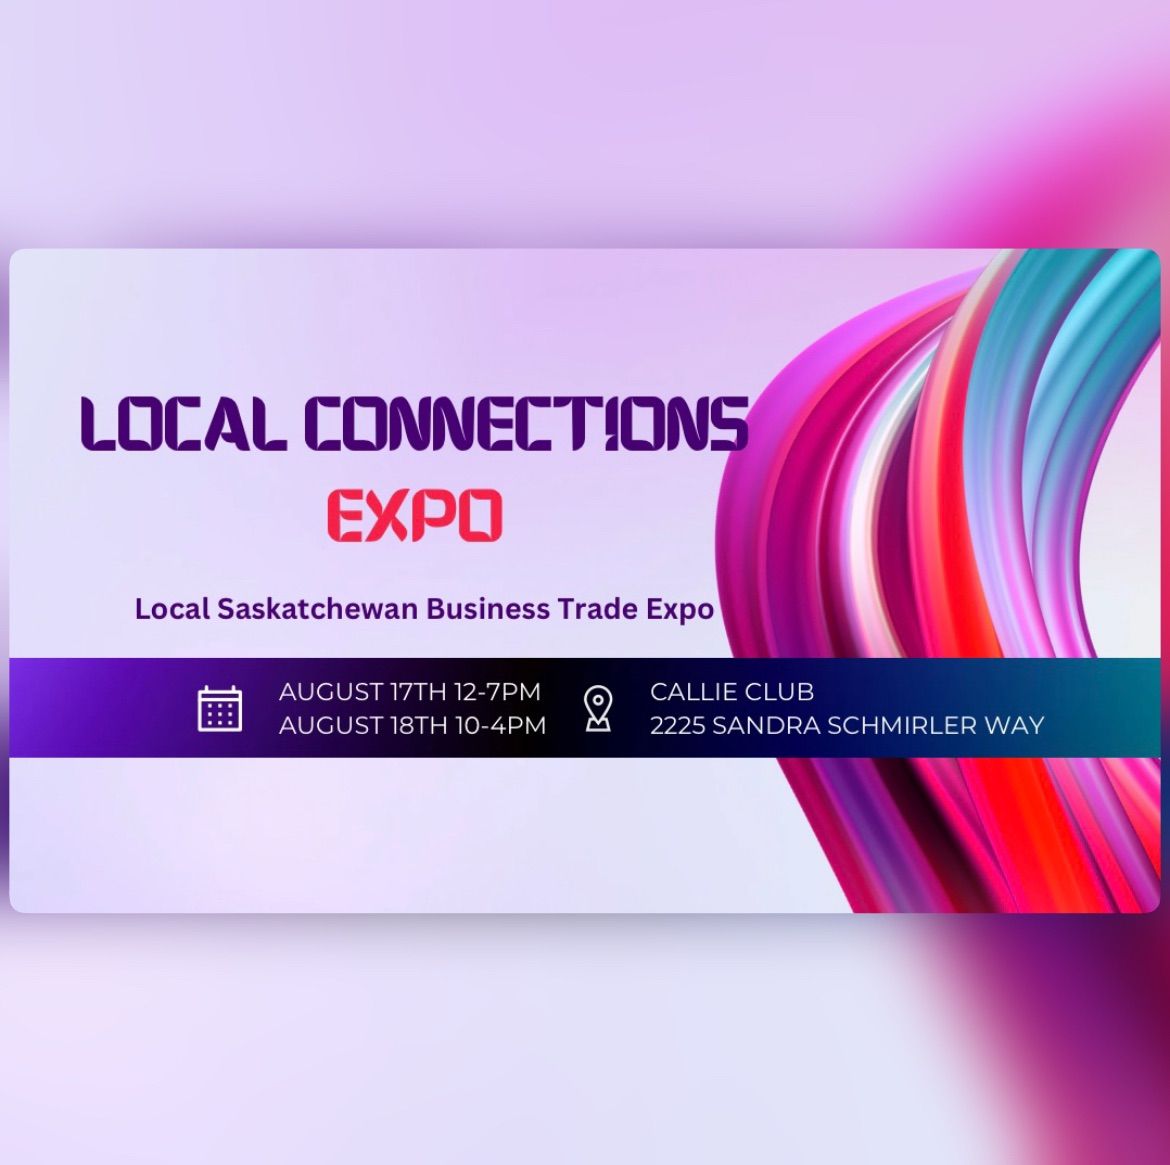 Local Connections Expo